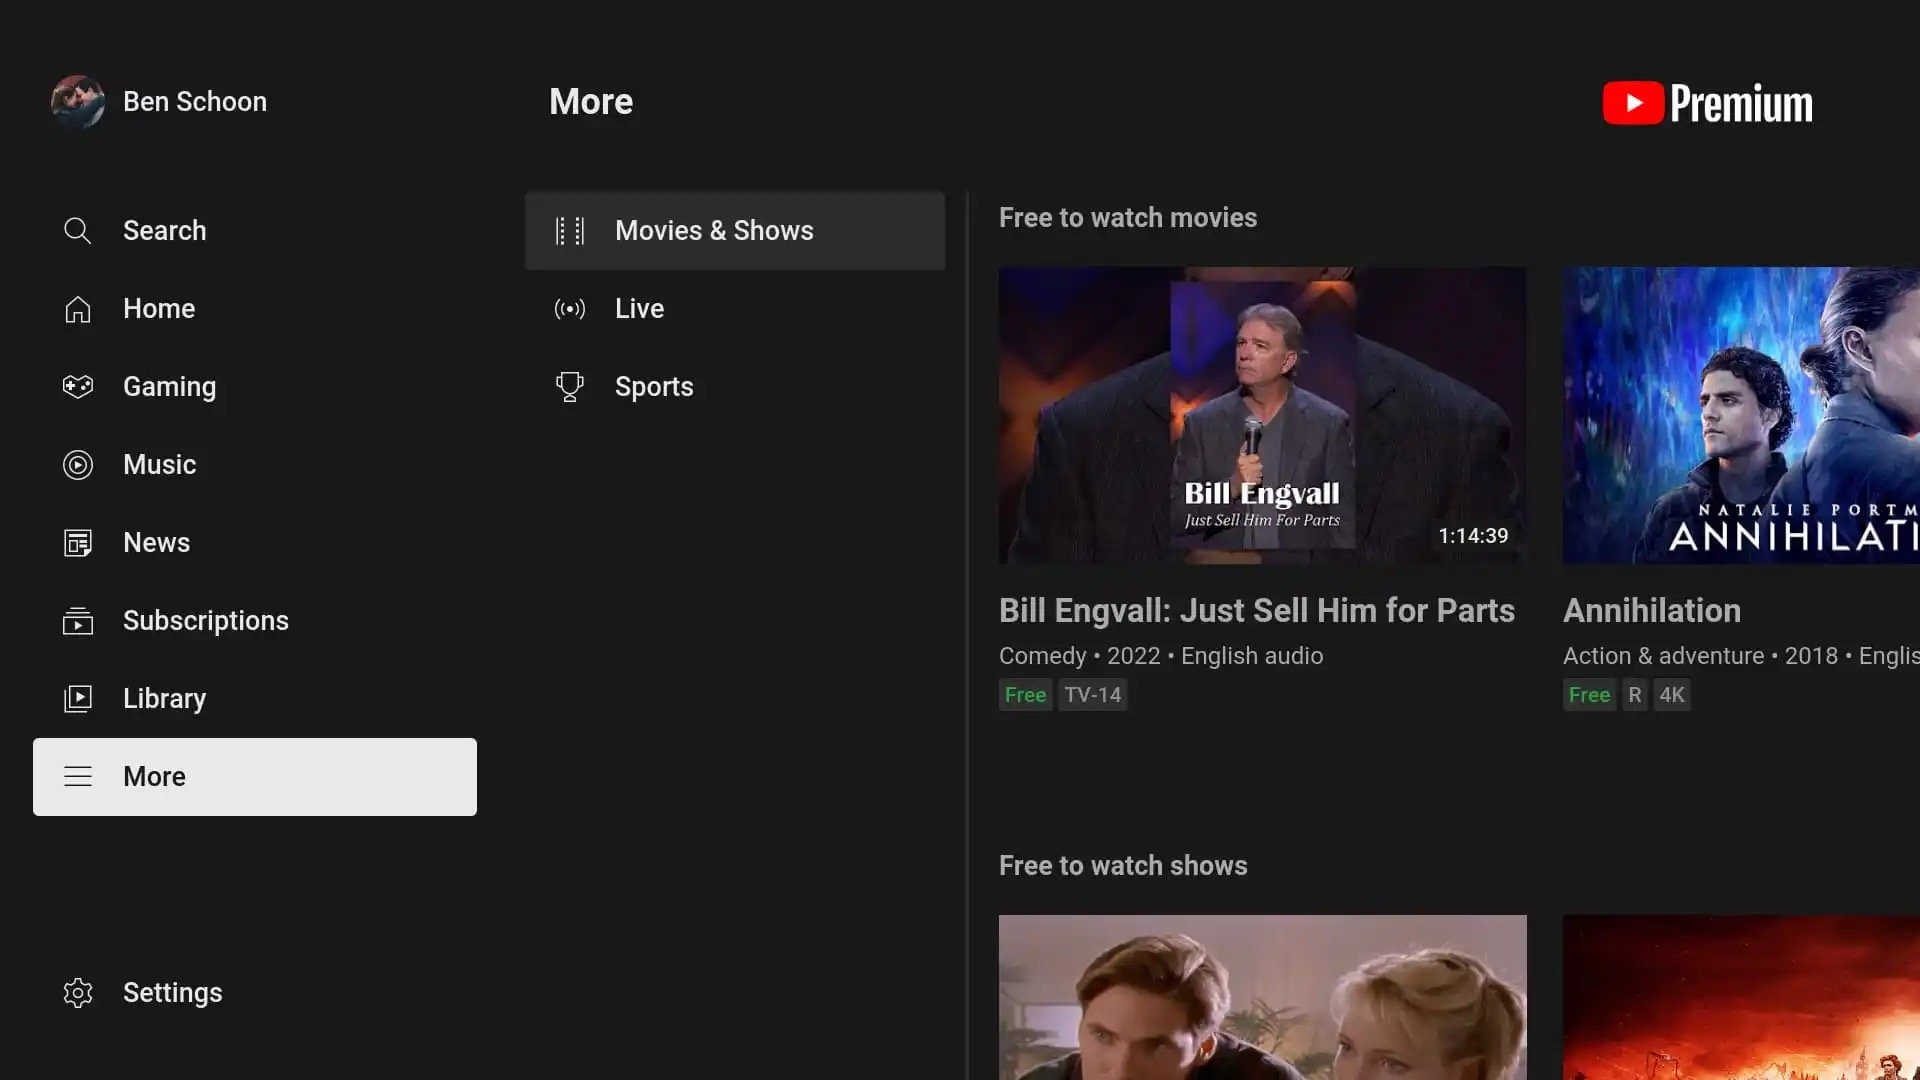 Samsung smart TVs could soon get updated YouTube app with cleaner look ...